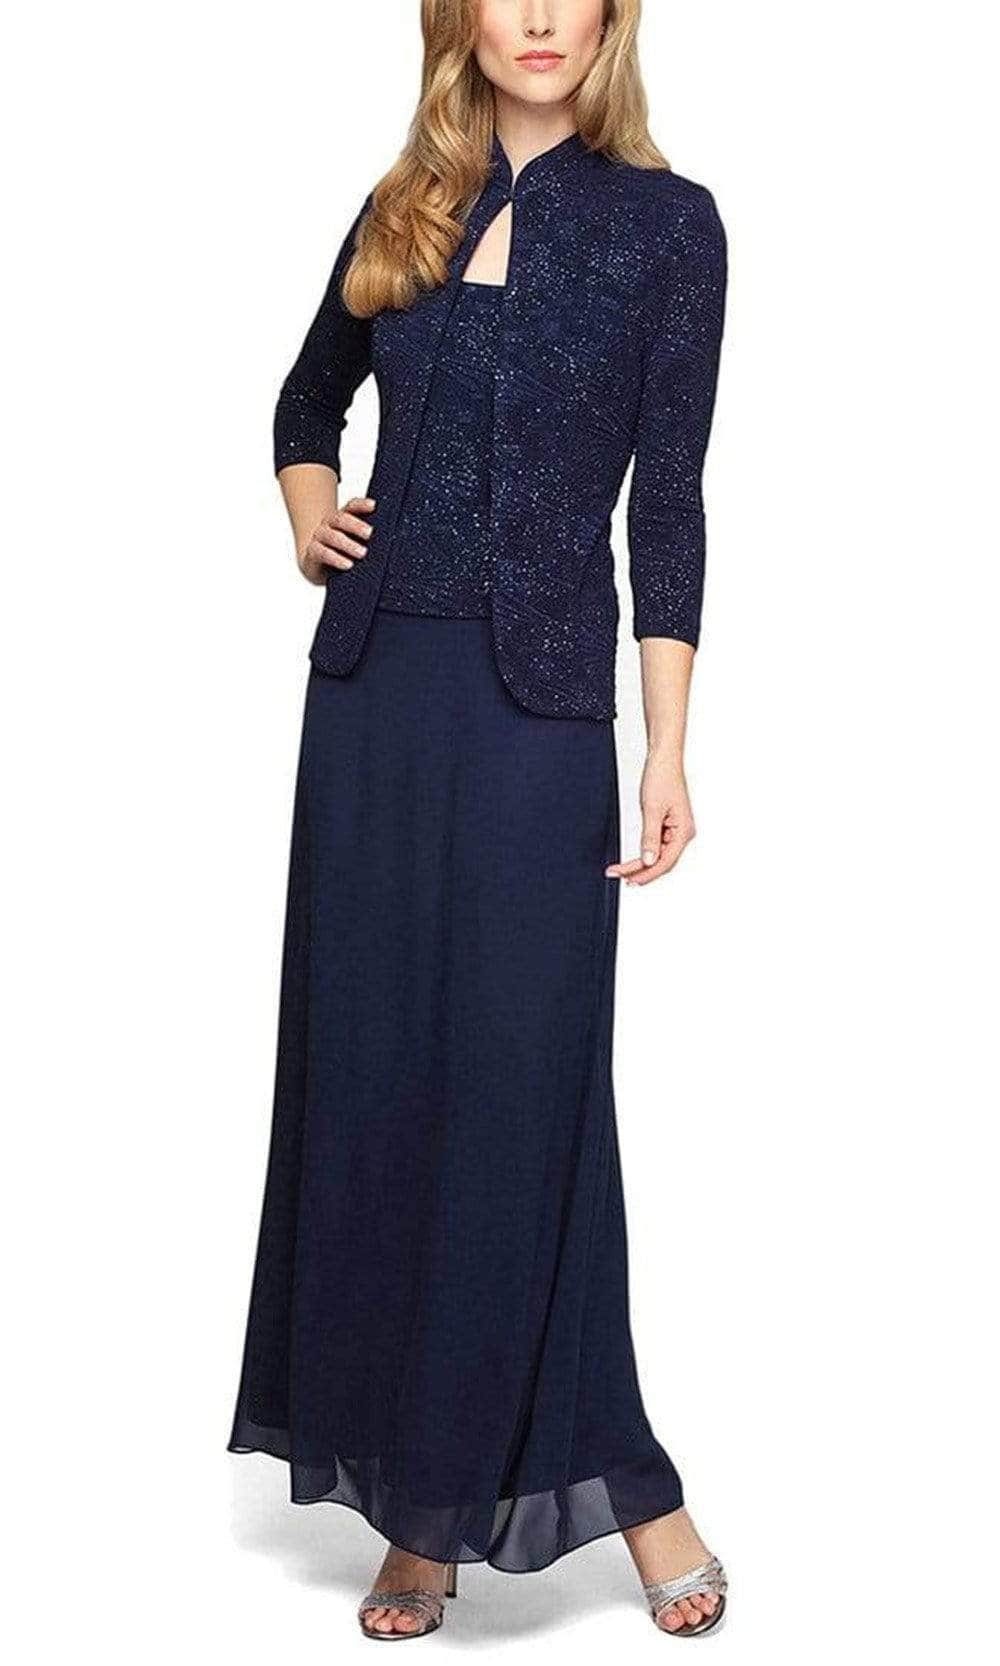 Alex Evenings - Glitter Jacquard Evening Dress 125053 - 1 pc Navy In Size 14 Available CCSALE 14 / Navy